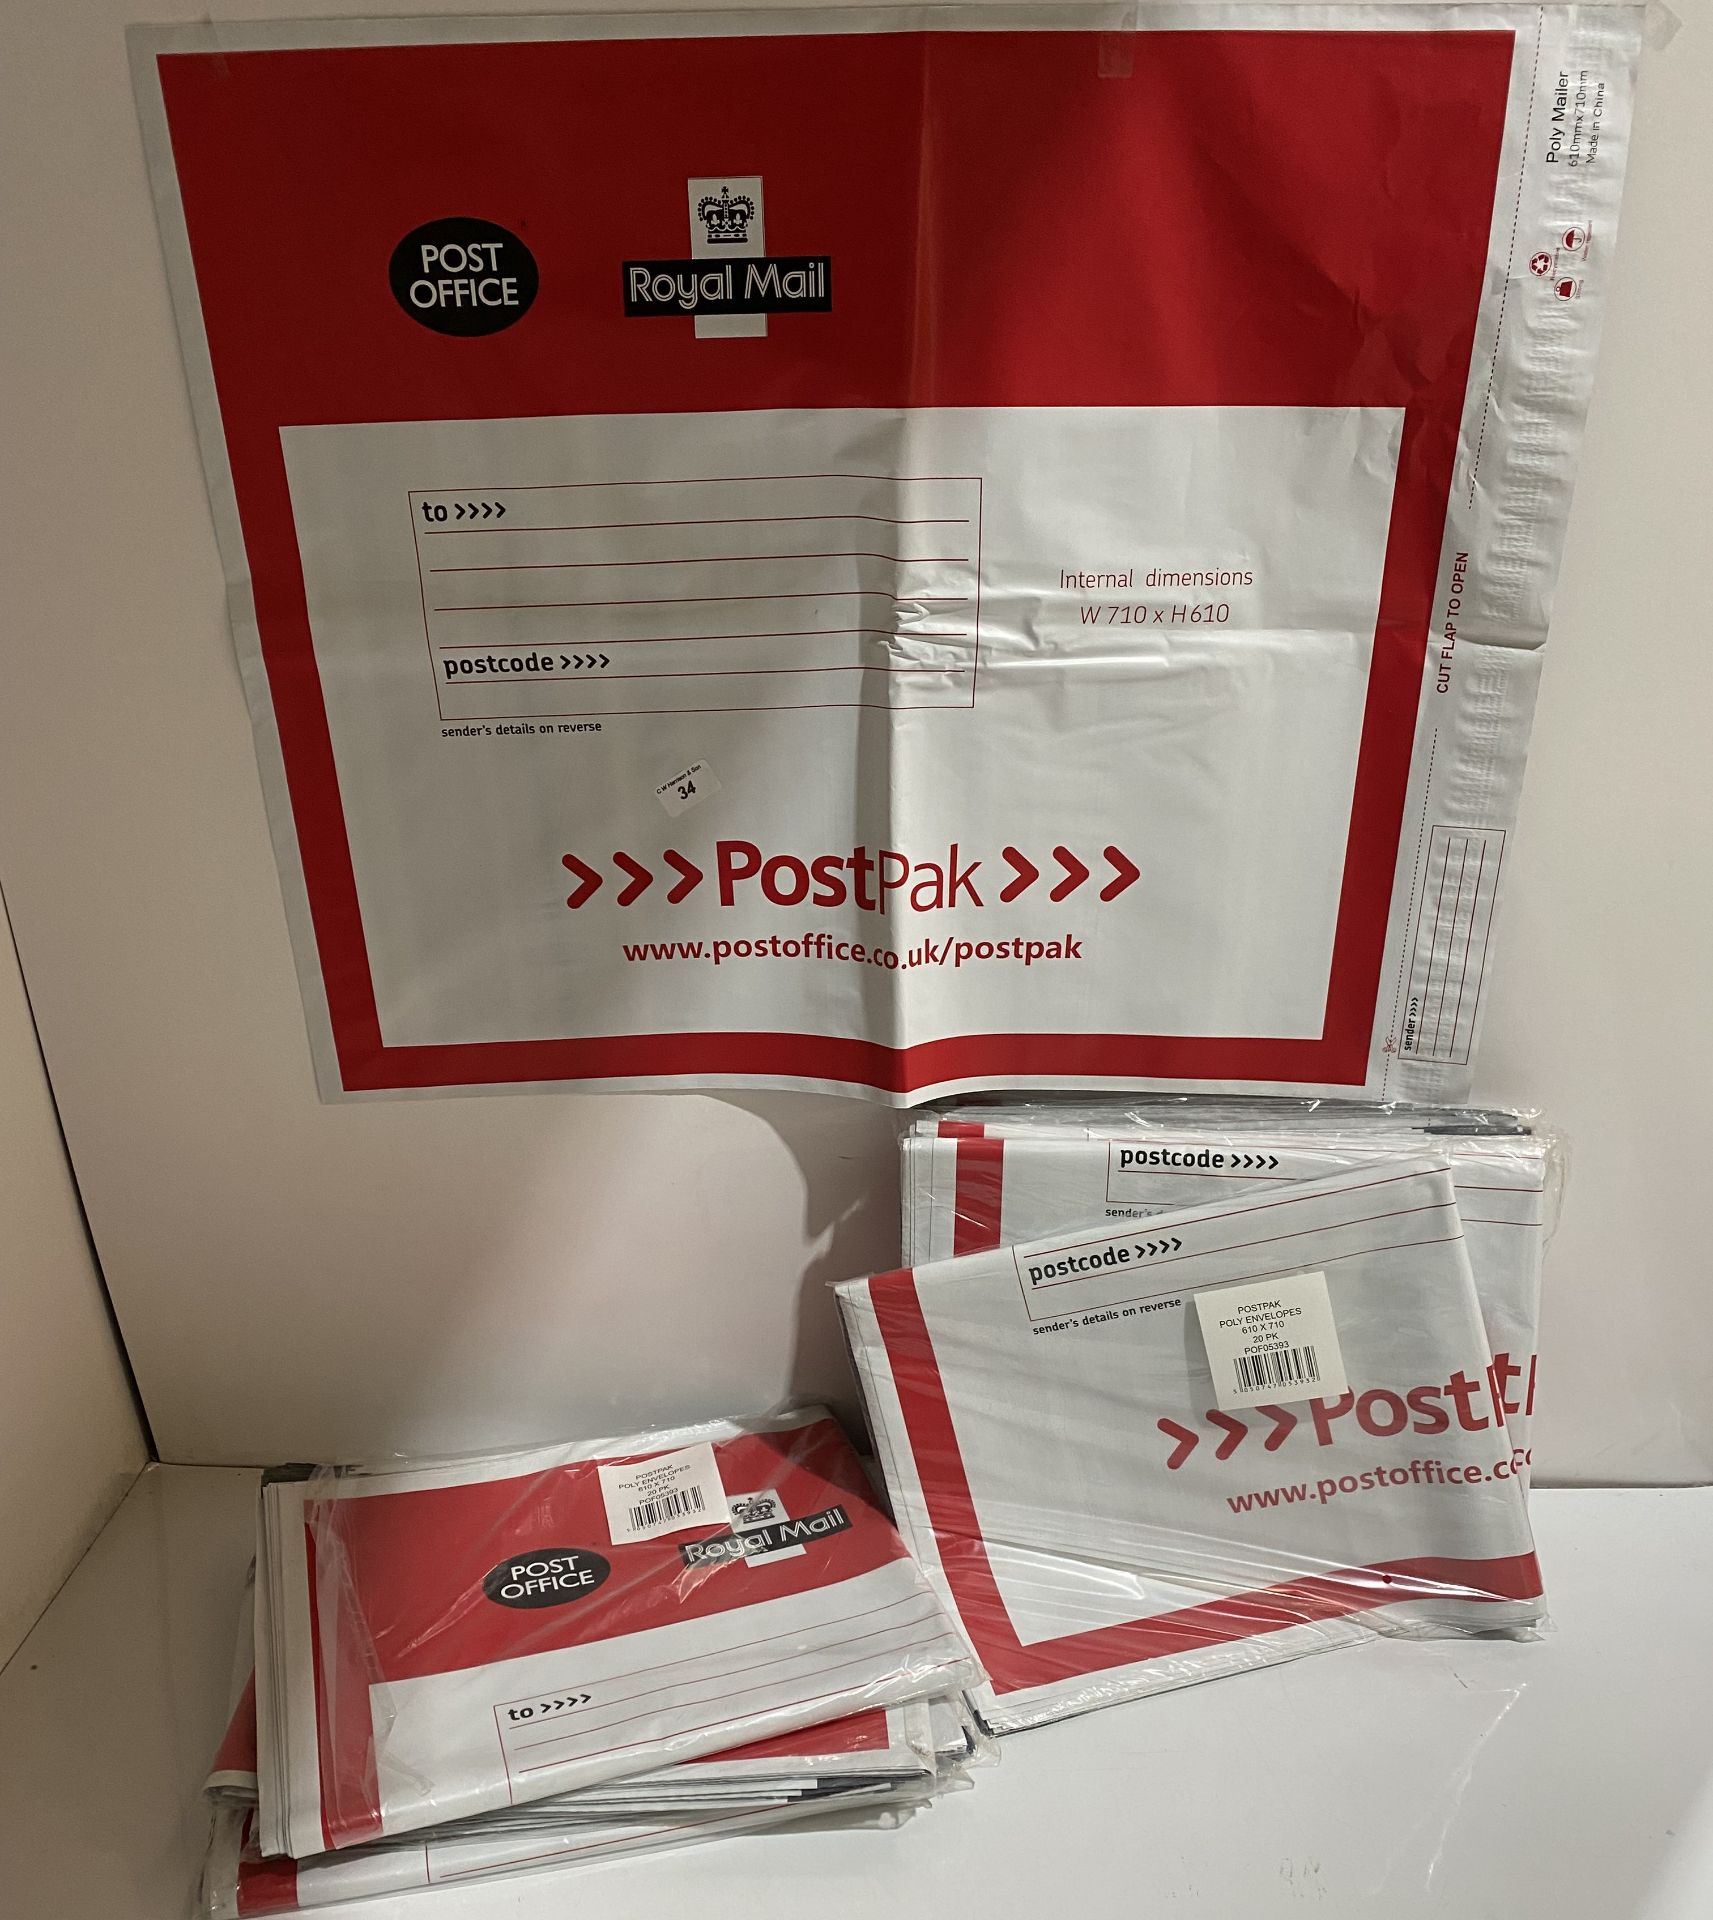 10 x packs of 20 Royal Mail poly mailing bags peel & seal w710xh610mm (saleroom location: H08)